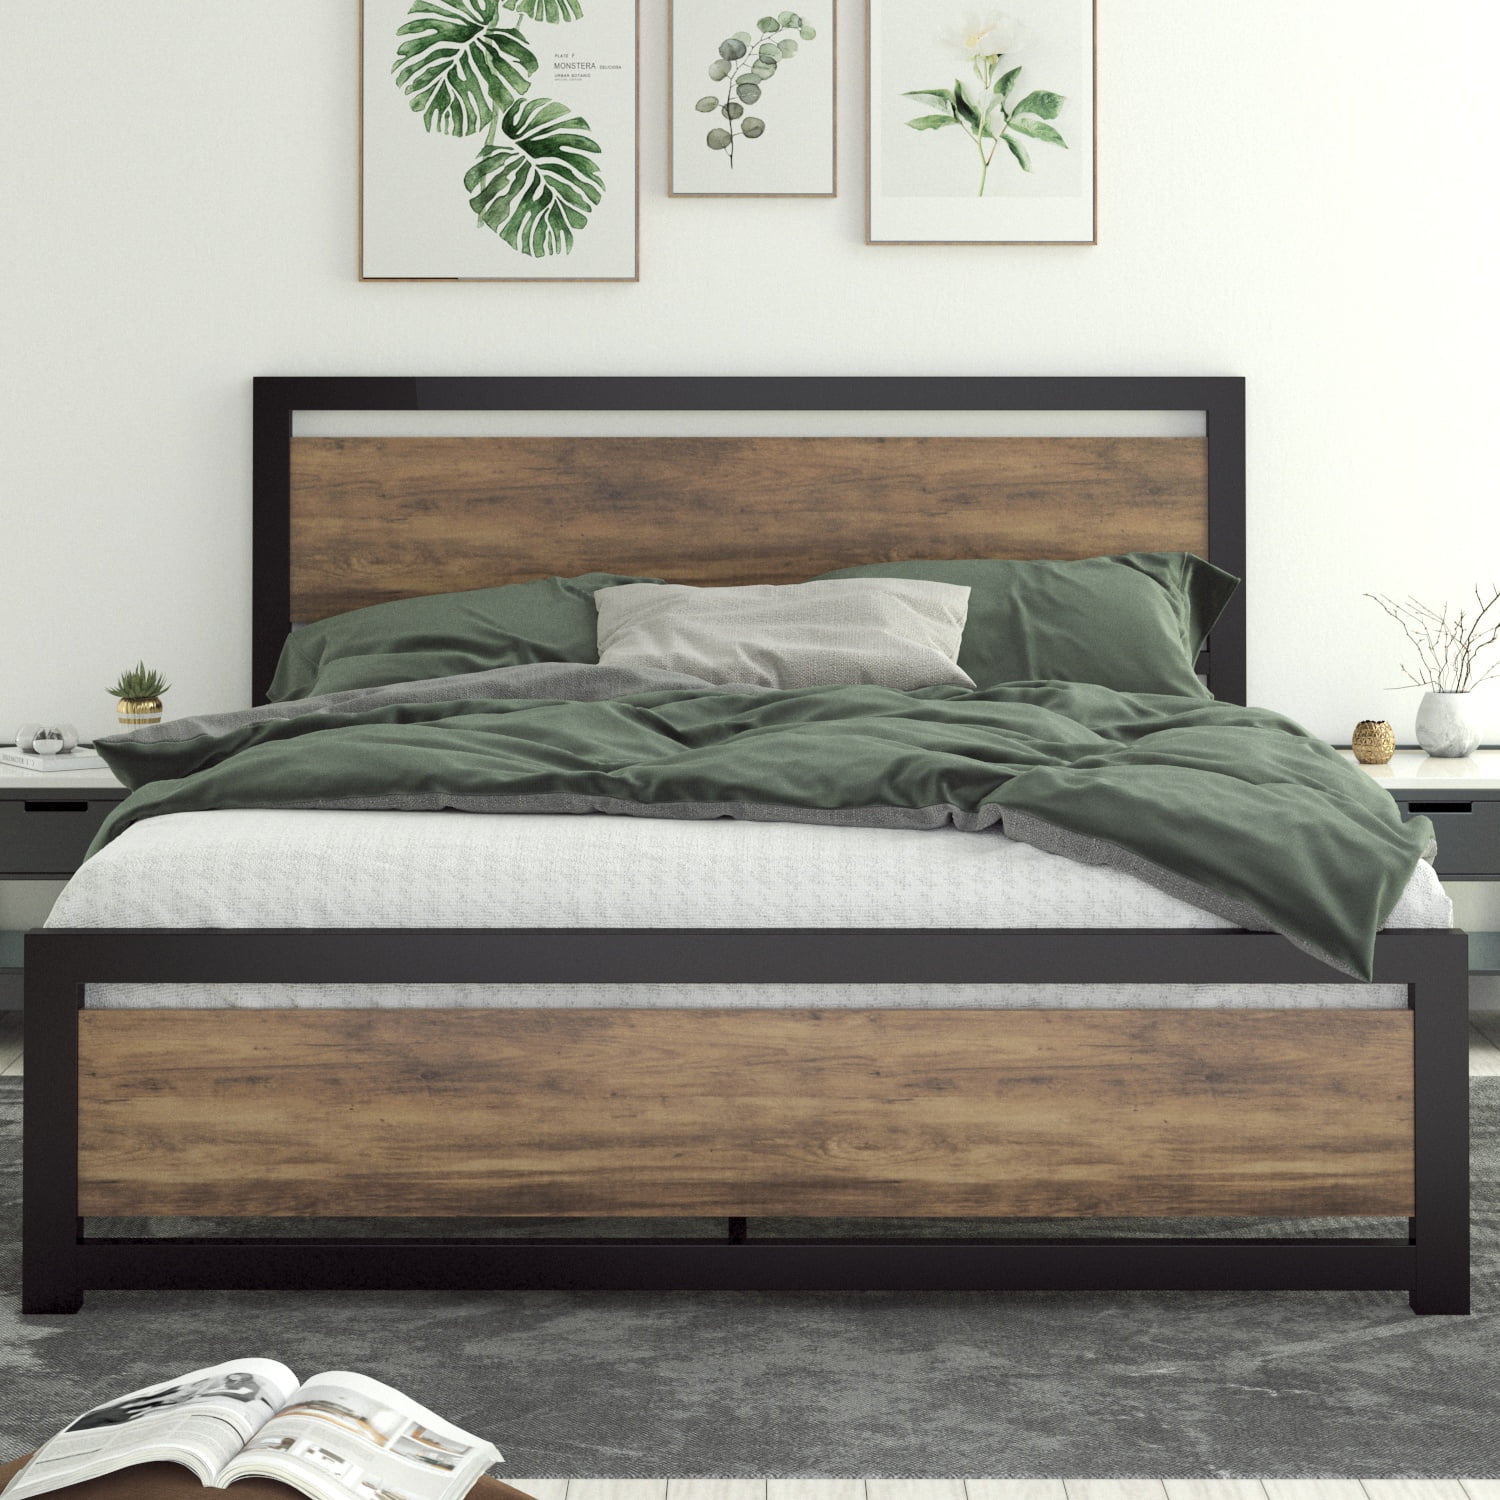 Queen Size Wooden Bed Frame with Headboard and Footboard Modern Bedroom Furnitur 